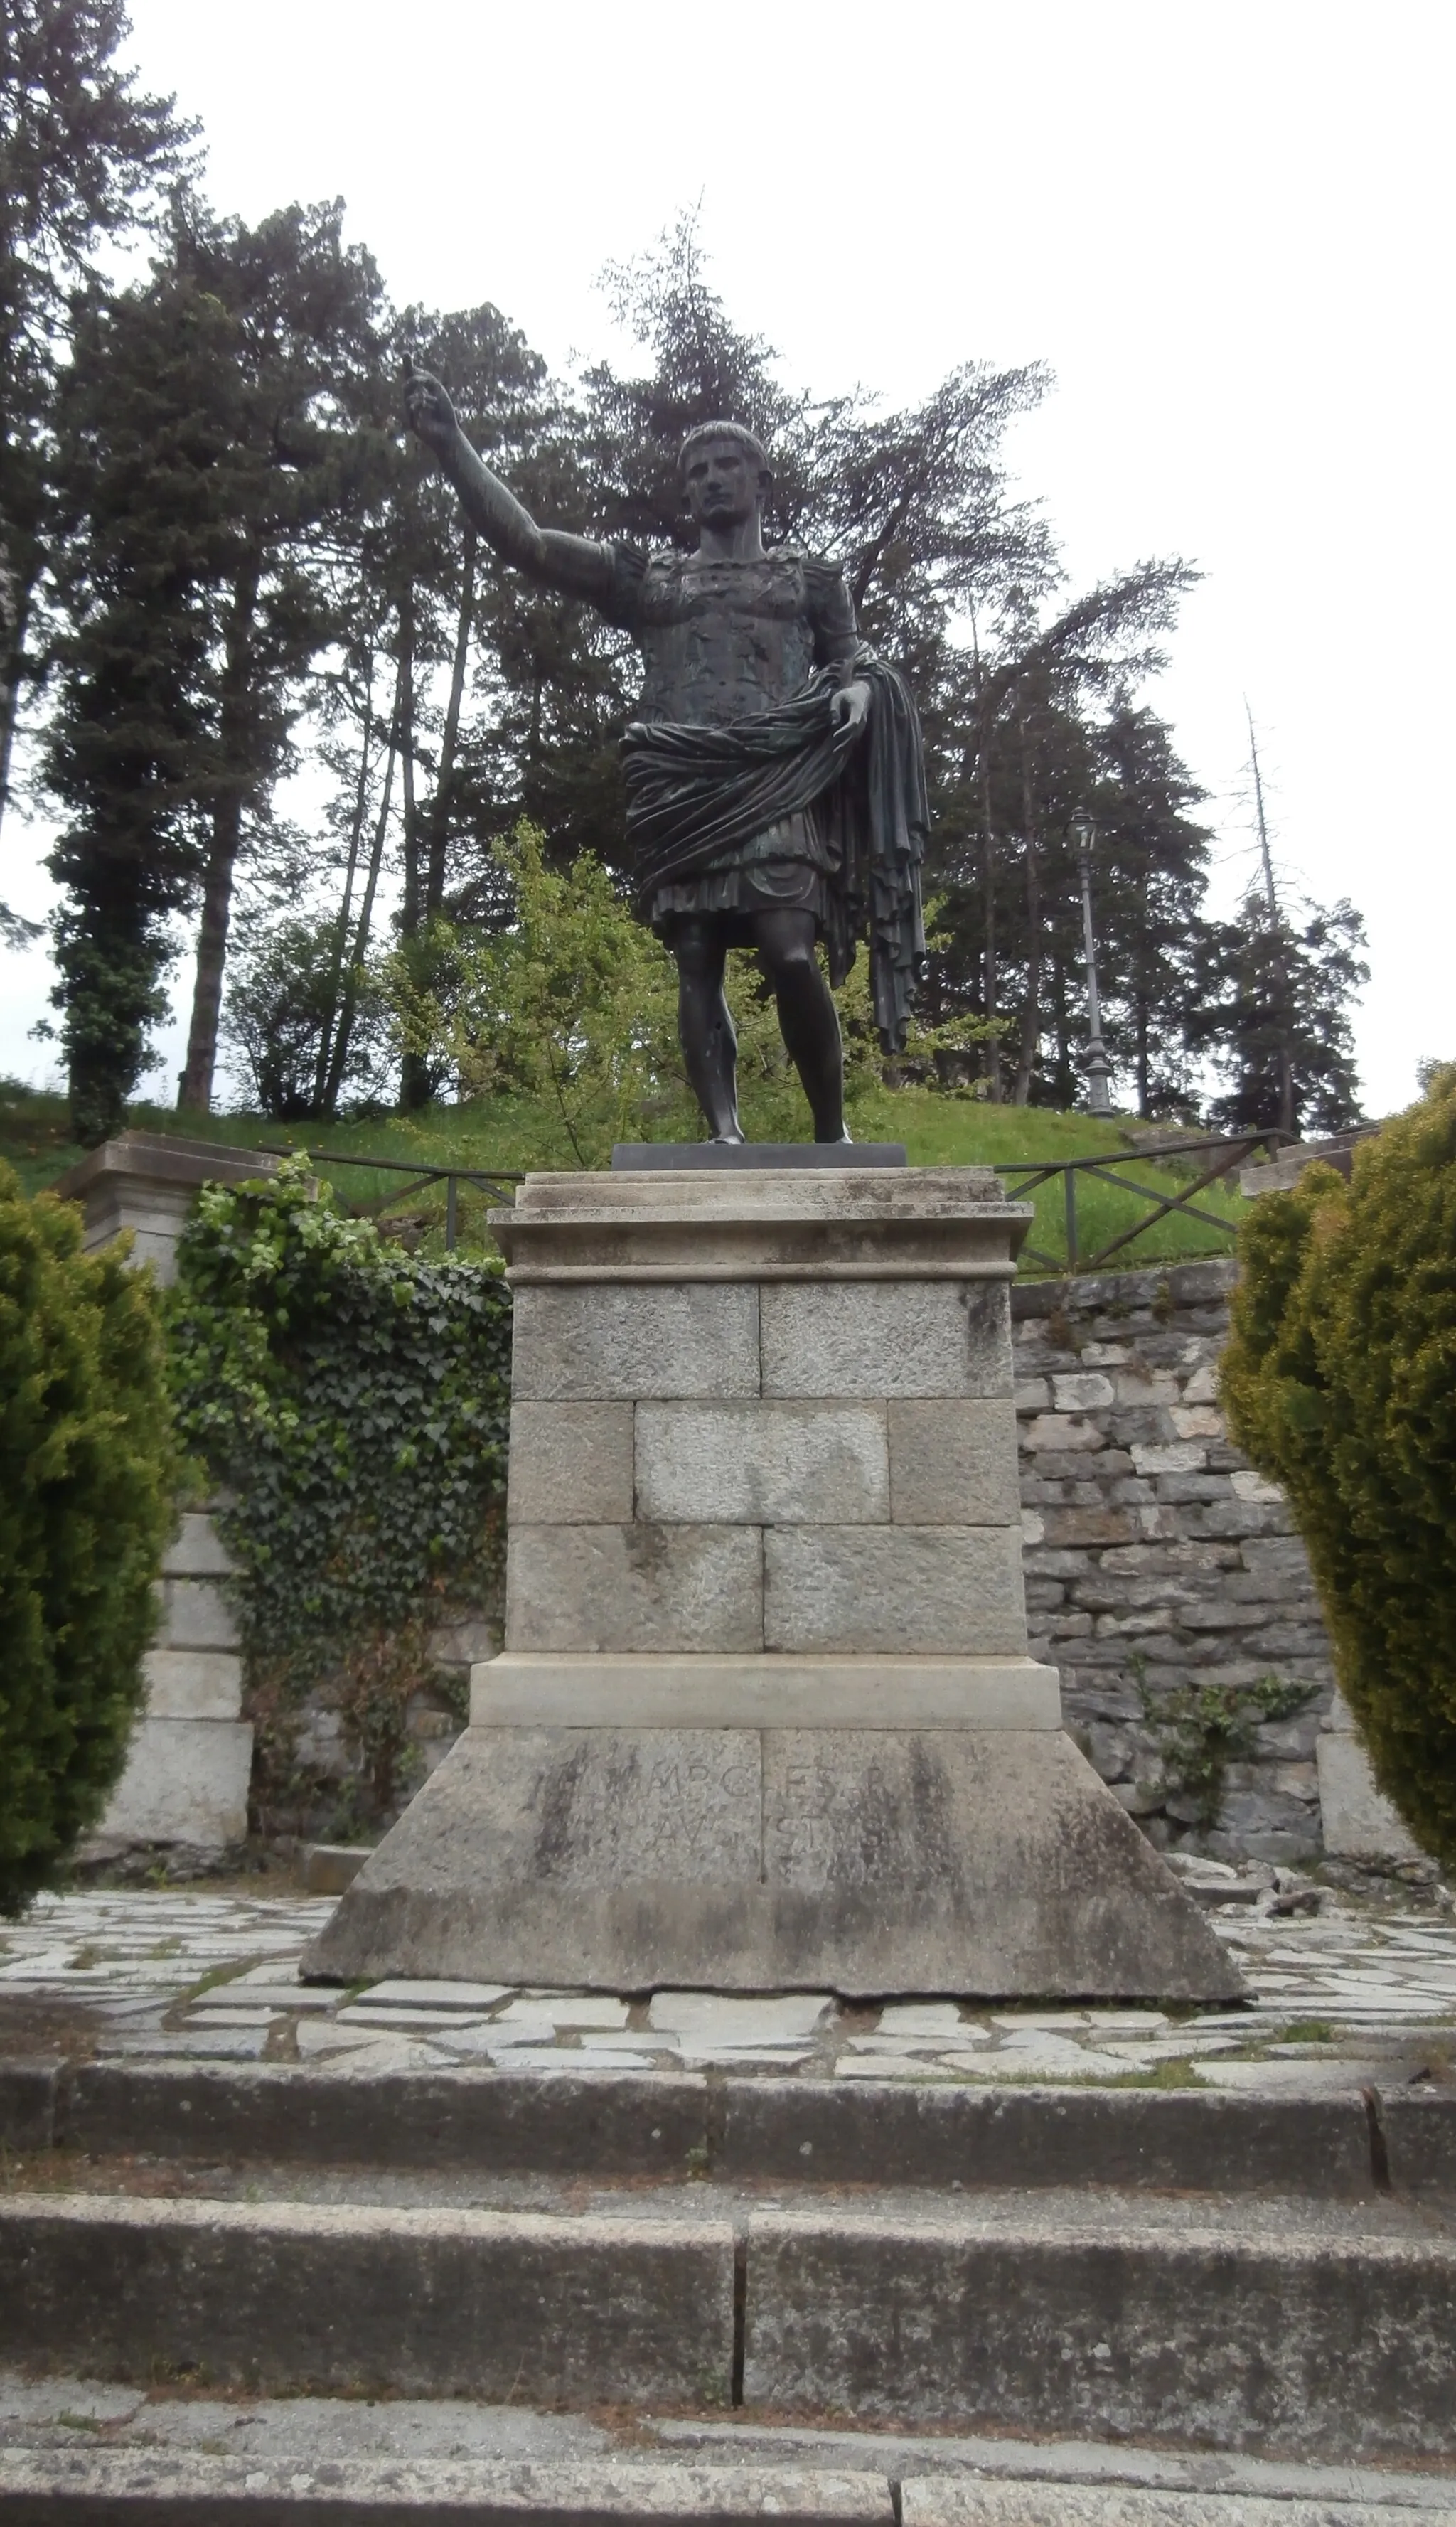 Photo showing: The statue of Emperor Augustus in Susa, Piedmont, Italy. I believe this statue is a replica, with the real one now in a museum. The Inscription appears to read "IMP CAESAR AVGVSTVS", although I do not know if it is original or a replica as well.